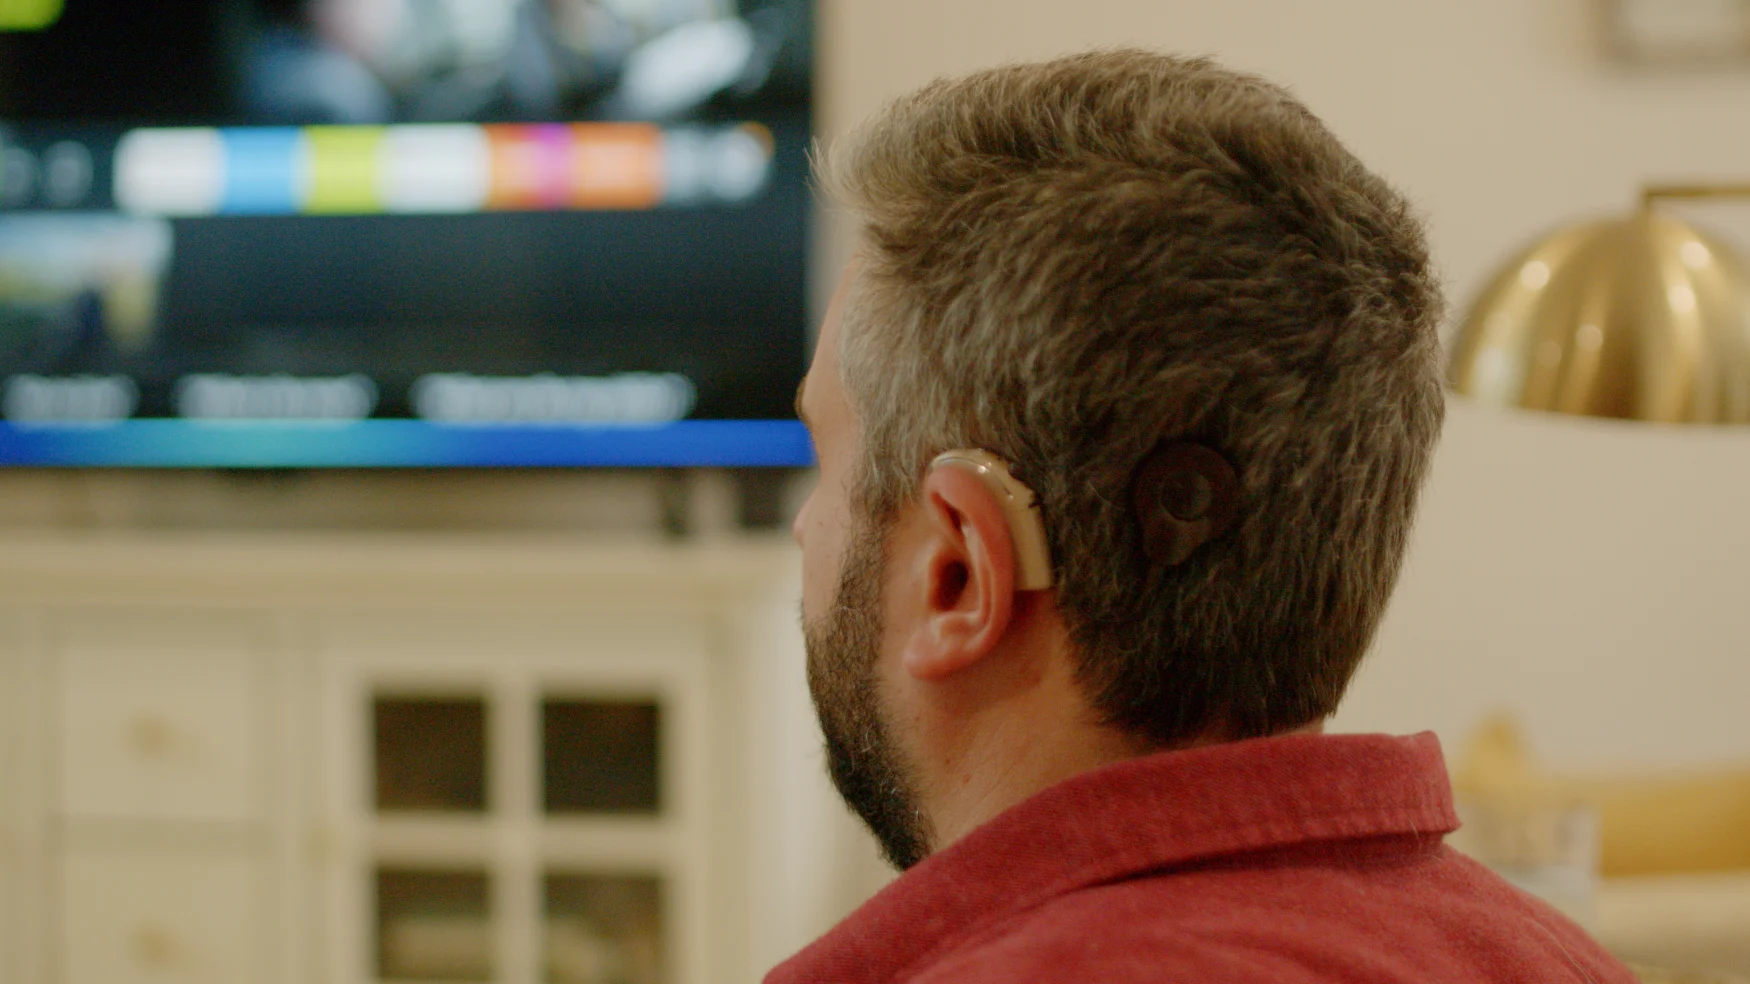 The back left of a bearded man’s head watching TV in his living room. He is wearing an assistive hearing device.